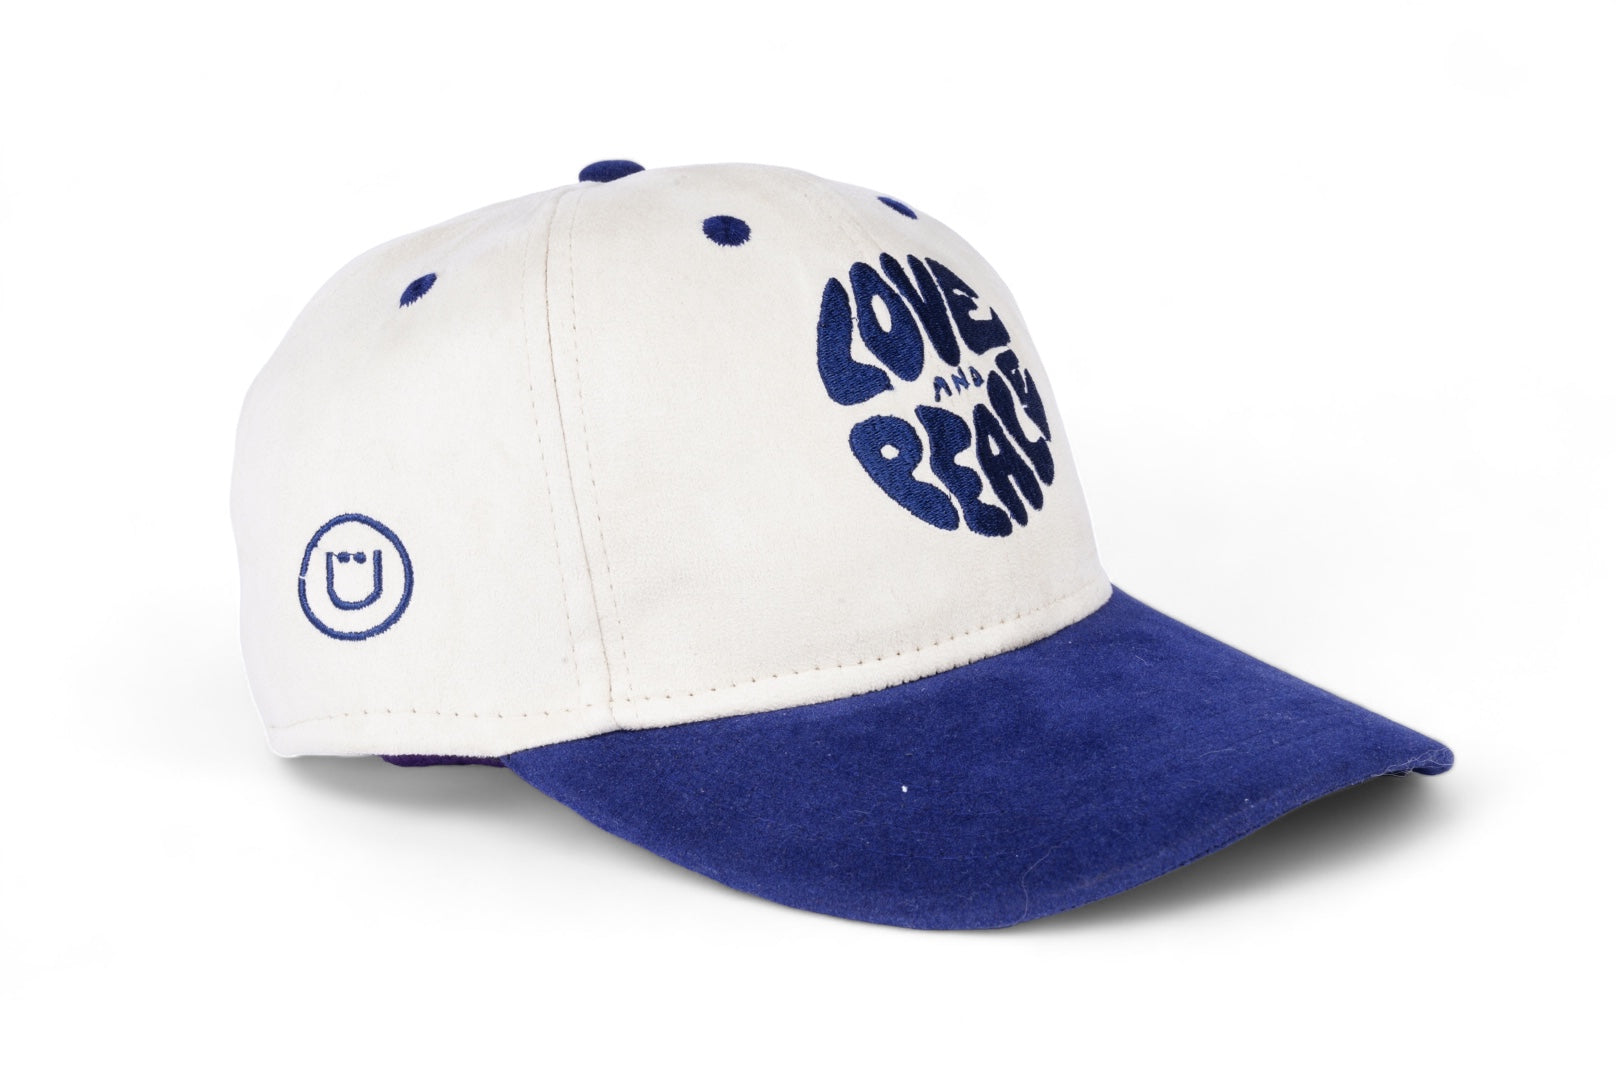 Stylish White and Blue snapback cap made with premium materials made to rock on all occasions, available at Cop Underdog In-store and ready to ship.